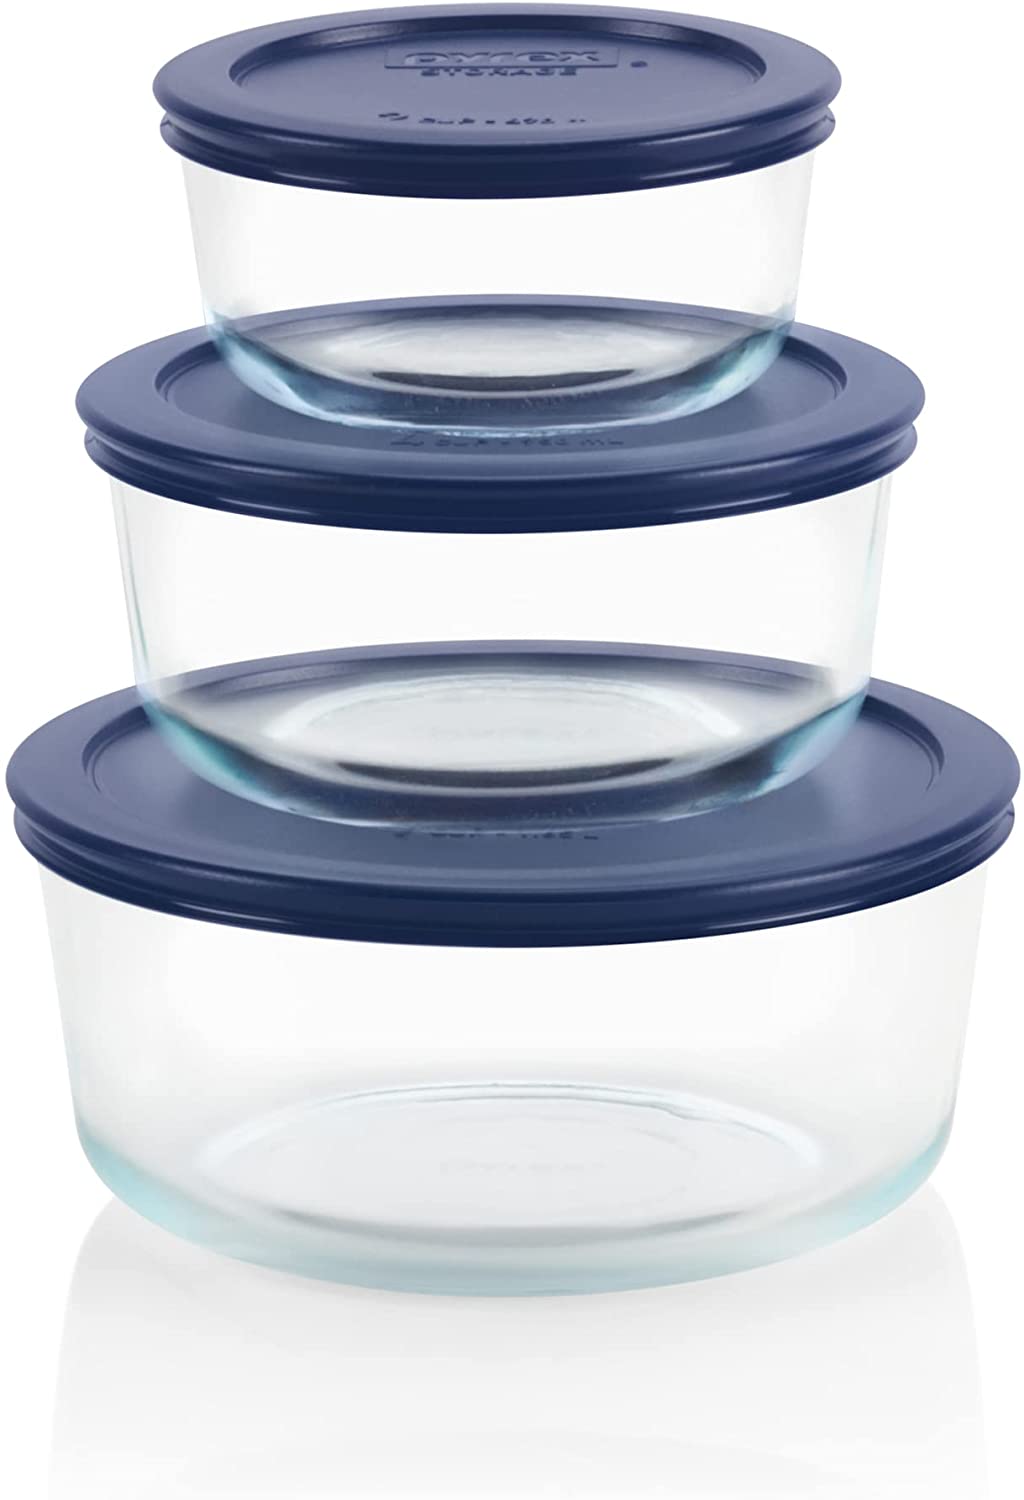 Pyrex Simply Store Glass Non-Toxic Food Container Cookware Set, 6-Piece